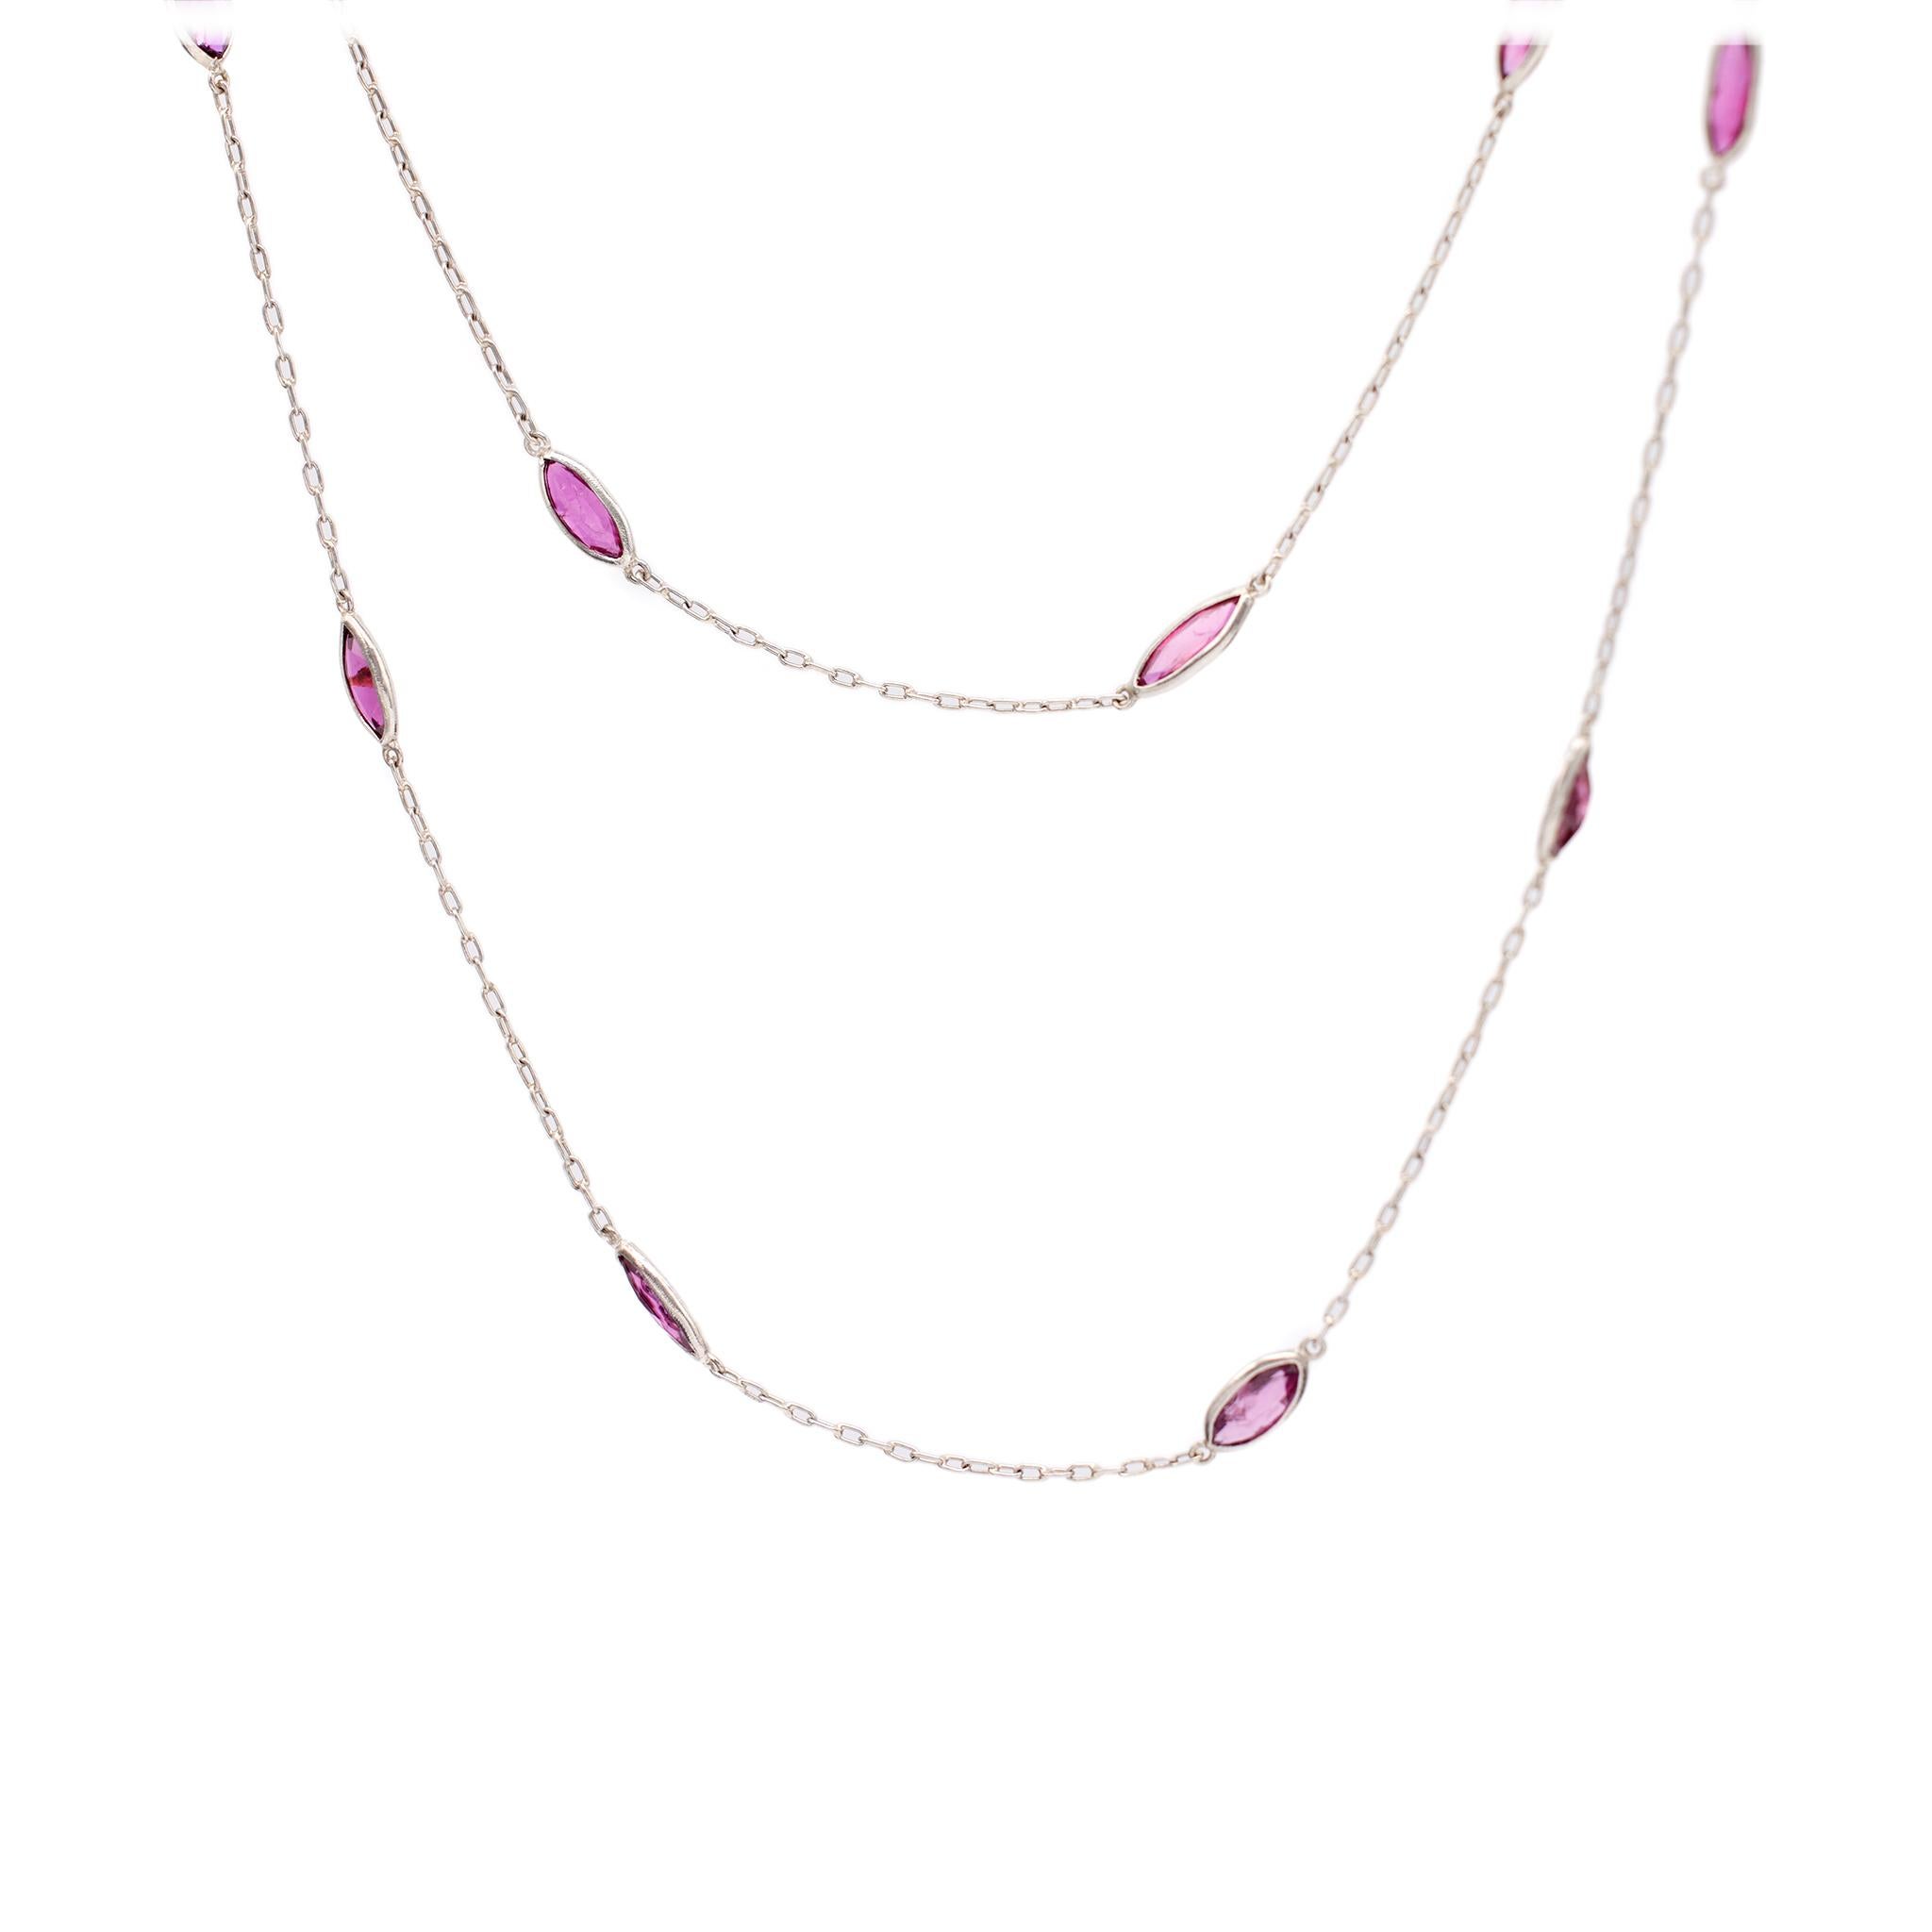 Women's or Men's Art Deco Inspired Ruby 18k White Gold Station Necklace For Sale